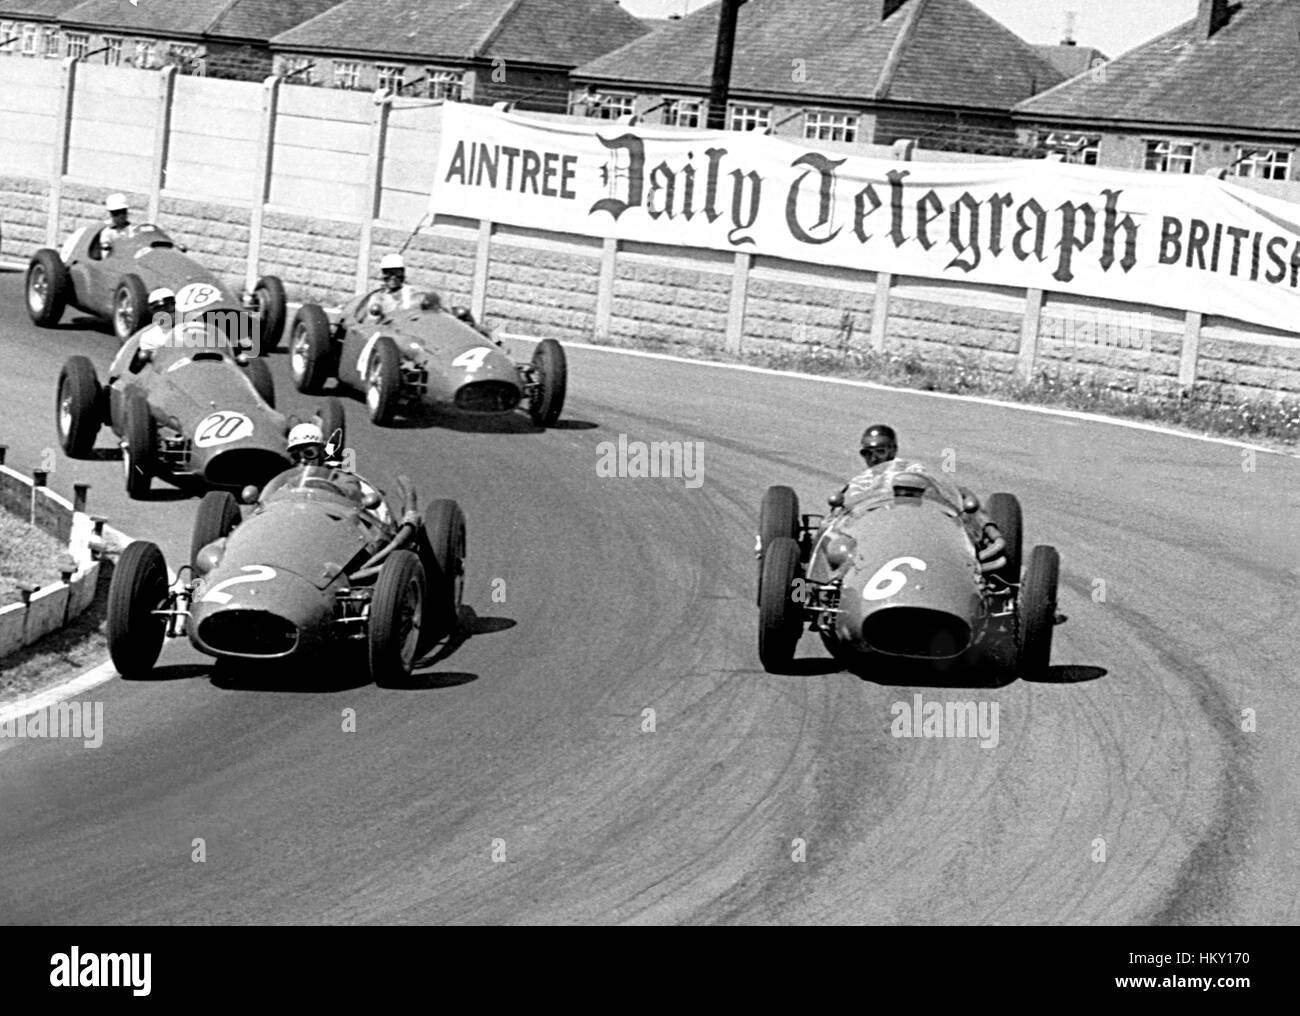 1955 Jean Behra French Maserati 250Fs dnf & Roberto Mieres Argentinian dnf Aintree British GP GG Stock Photo